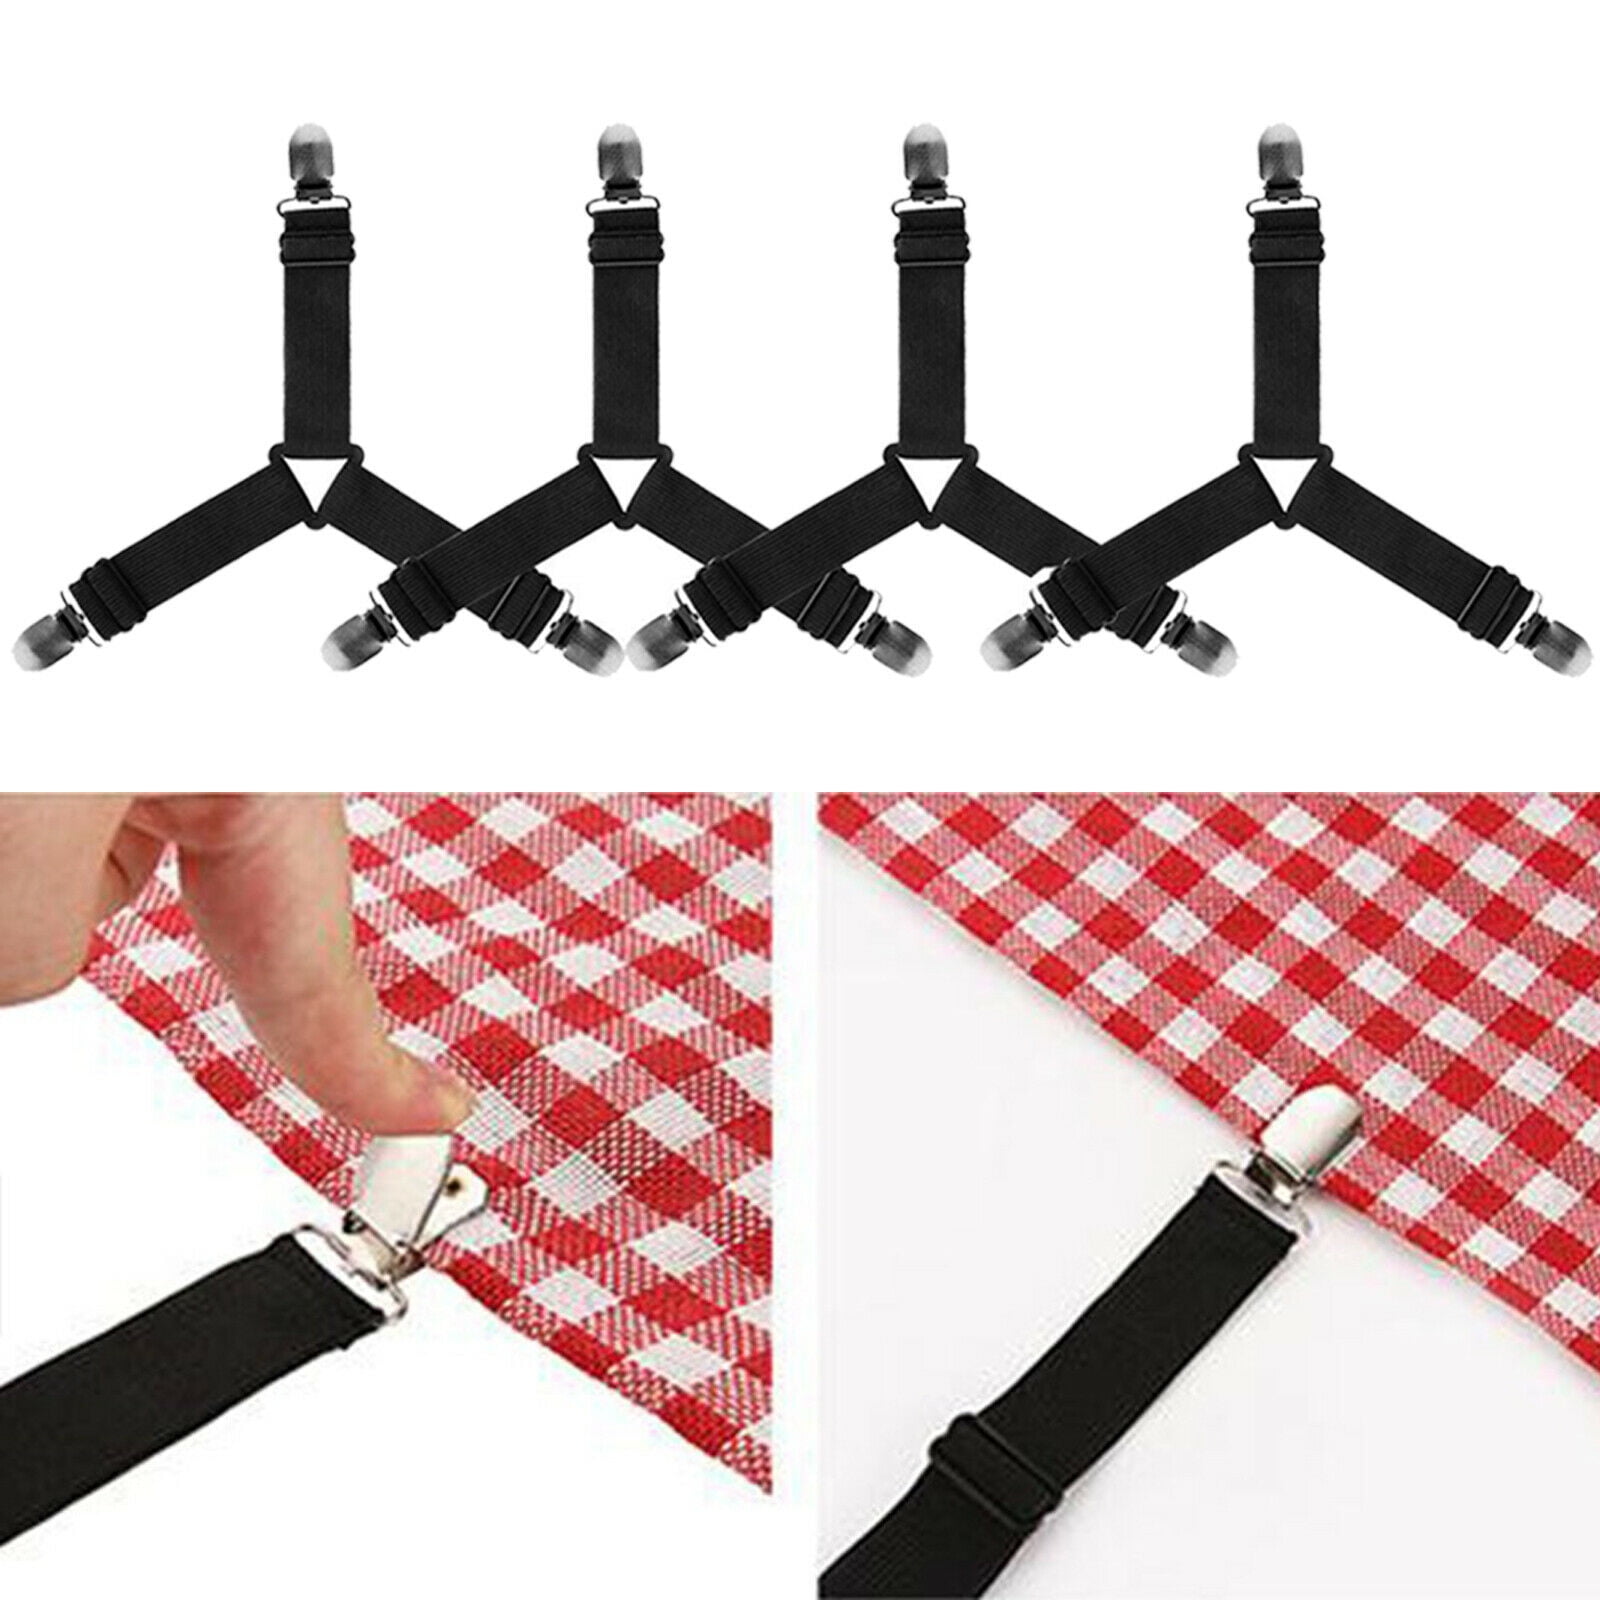 4 X Sheet Iron Cover Fasteners Grippers Straps Hold Grips Elastic Chrome Clips 